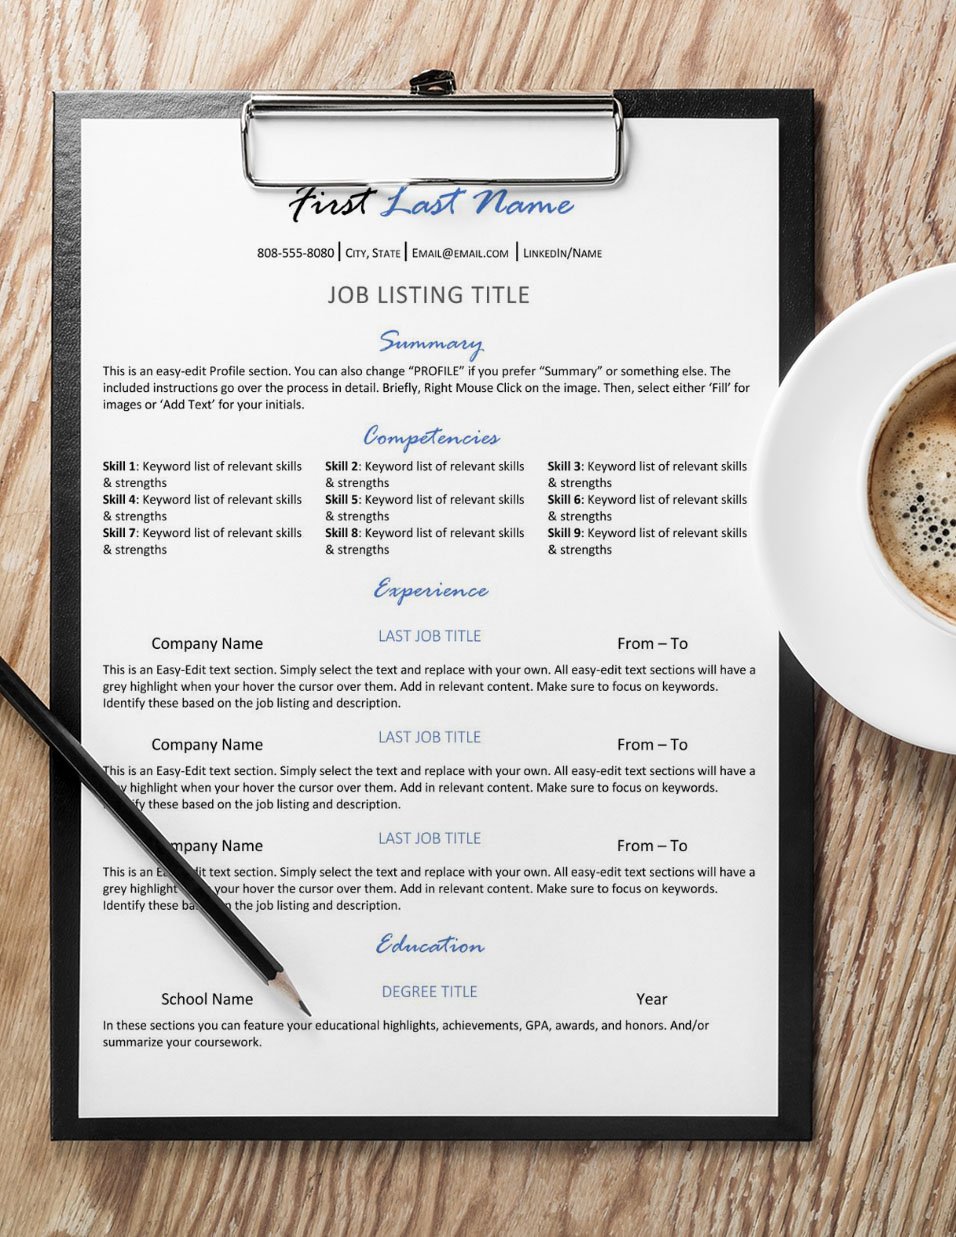 Central Style - Resume with Coffee